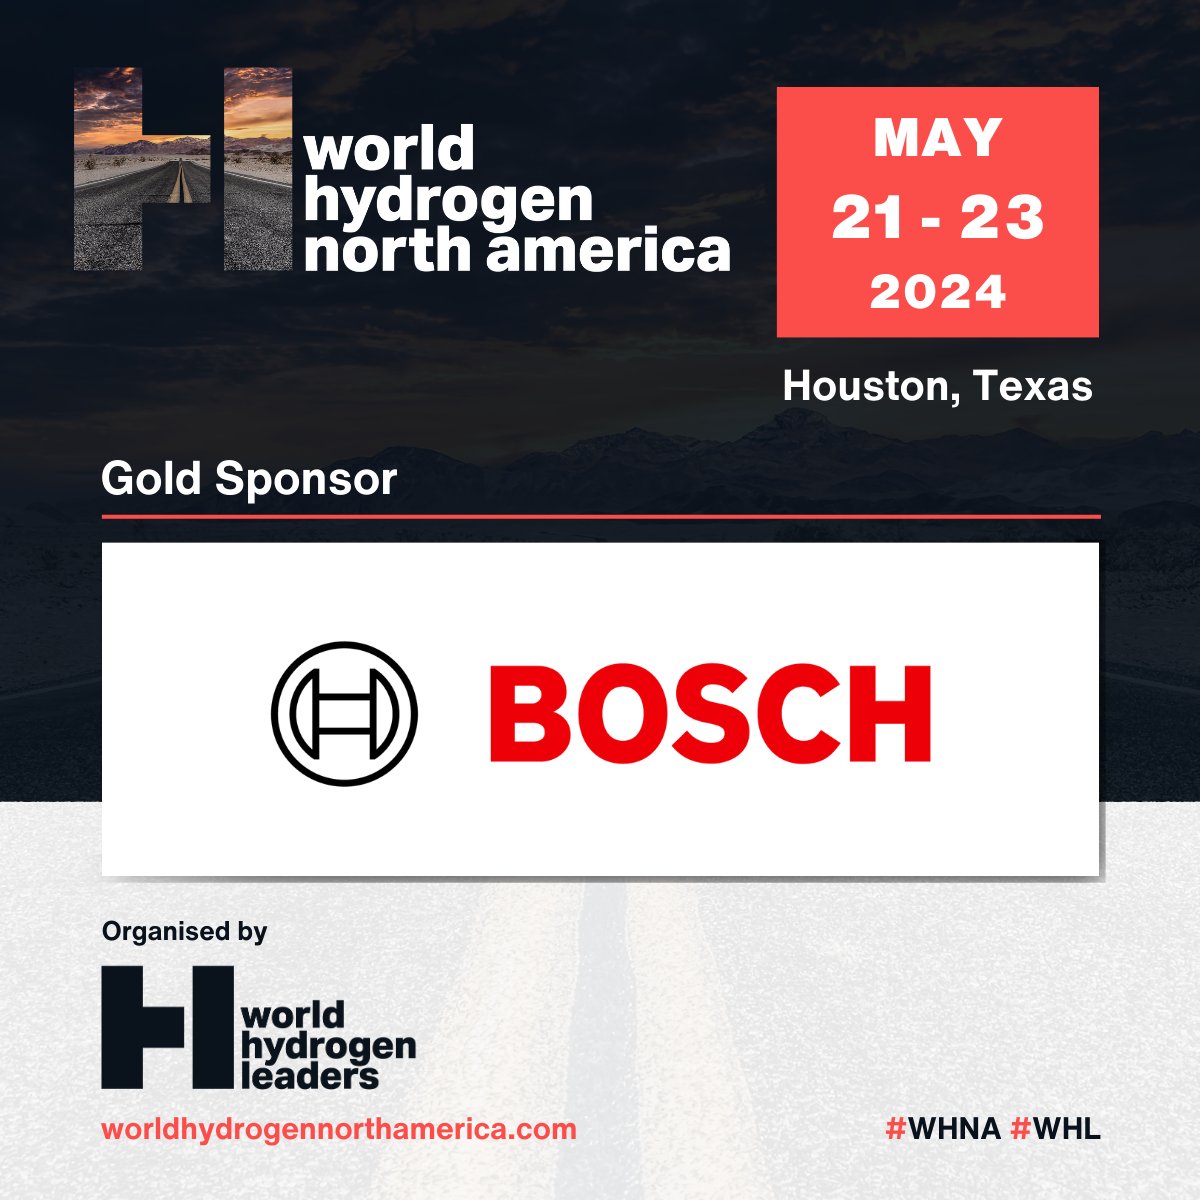 👐 We're happy to announce @BoschGlobal as a Gold Sponsor of #WorldHydrogenNorthAmerica, taking place May 21-23 in Houston! More on Bosch, at: bosch-hydrogen-energy.com 🎟️ Register for #WHNA before THIS FRIDAY, April 26 to SAVE up to $700 on your pass: worldhydrogennorthamerica.com/event/b9129970…